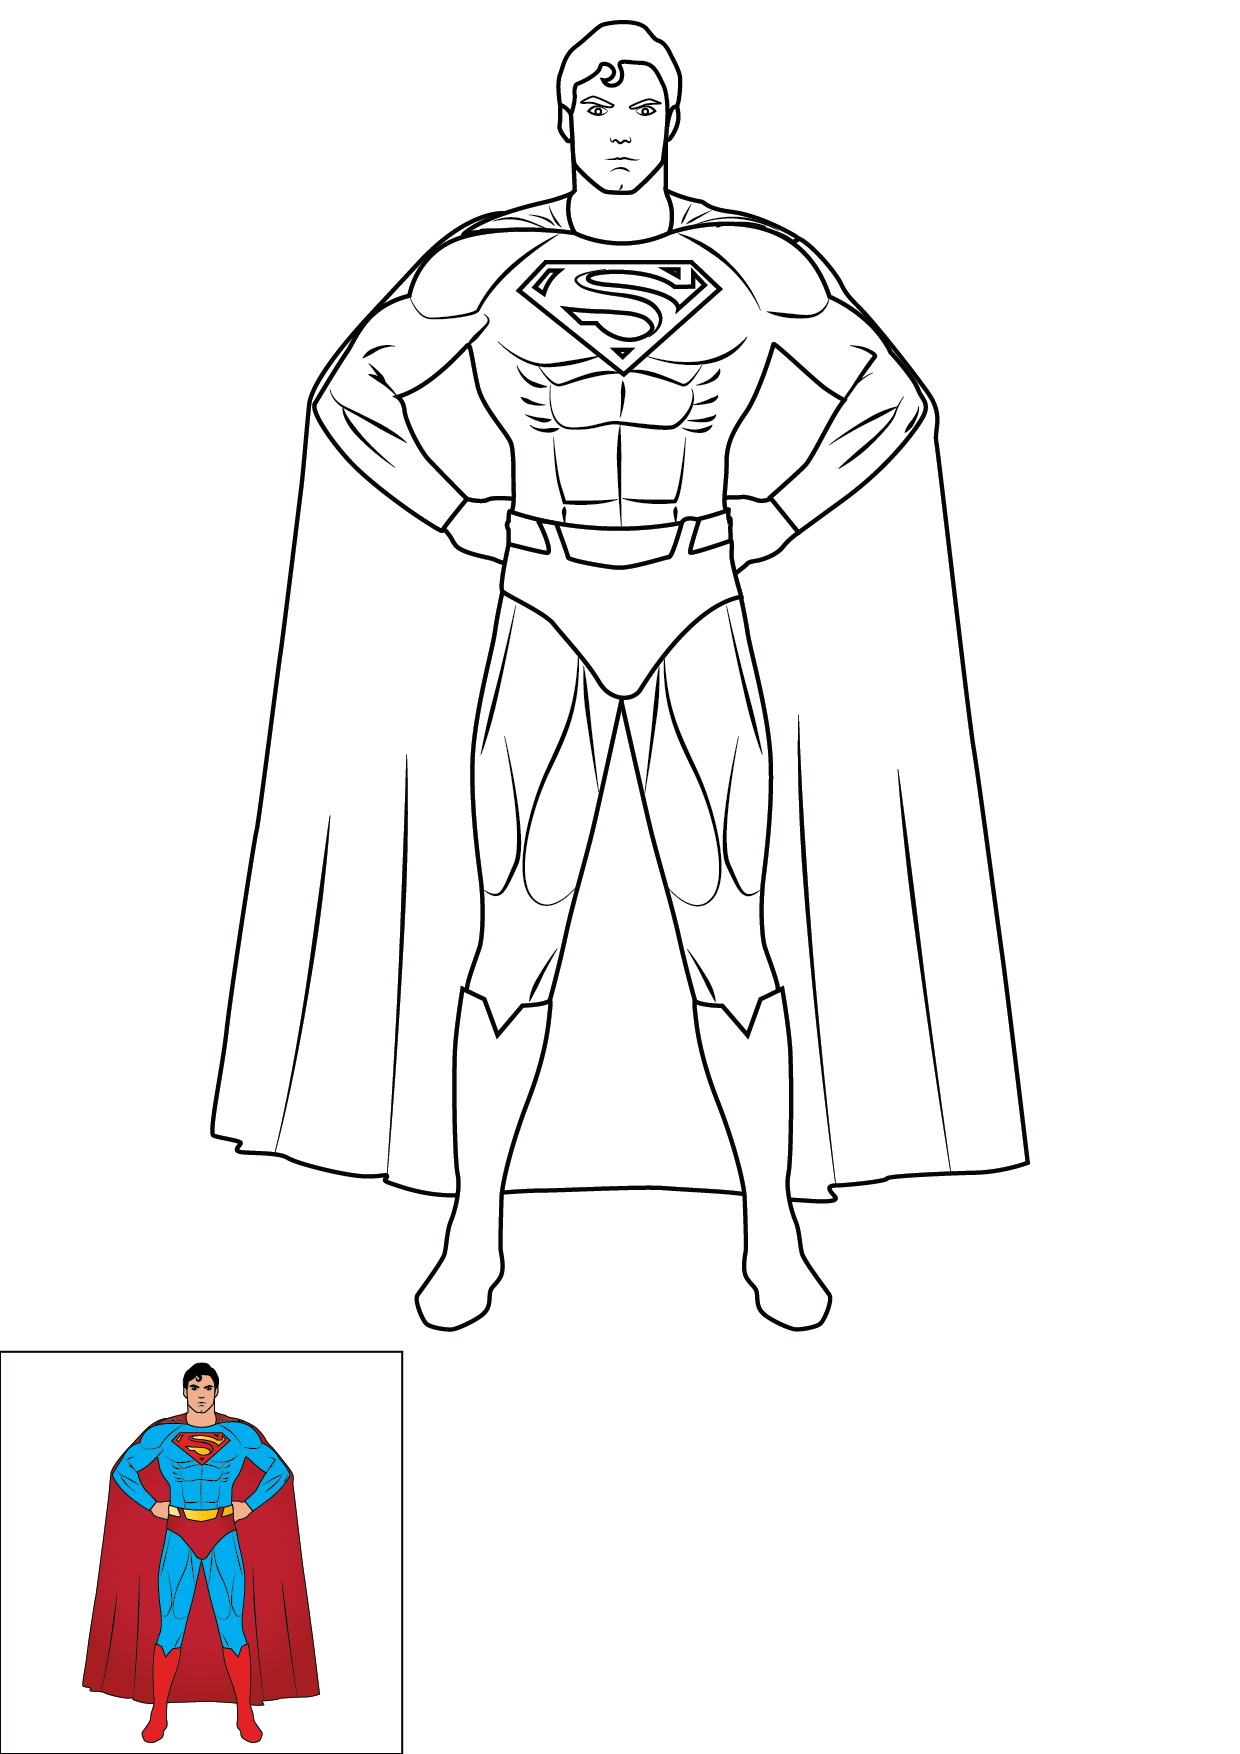 How to Draw Superman Step by Step Printable Color